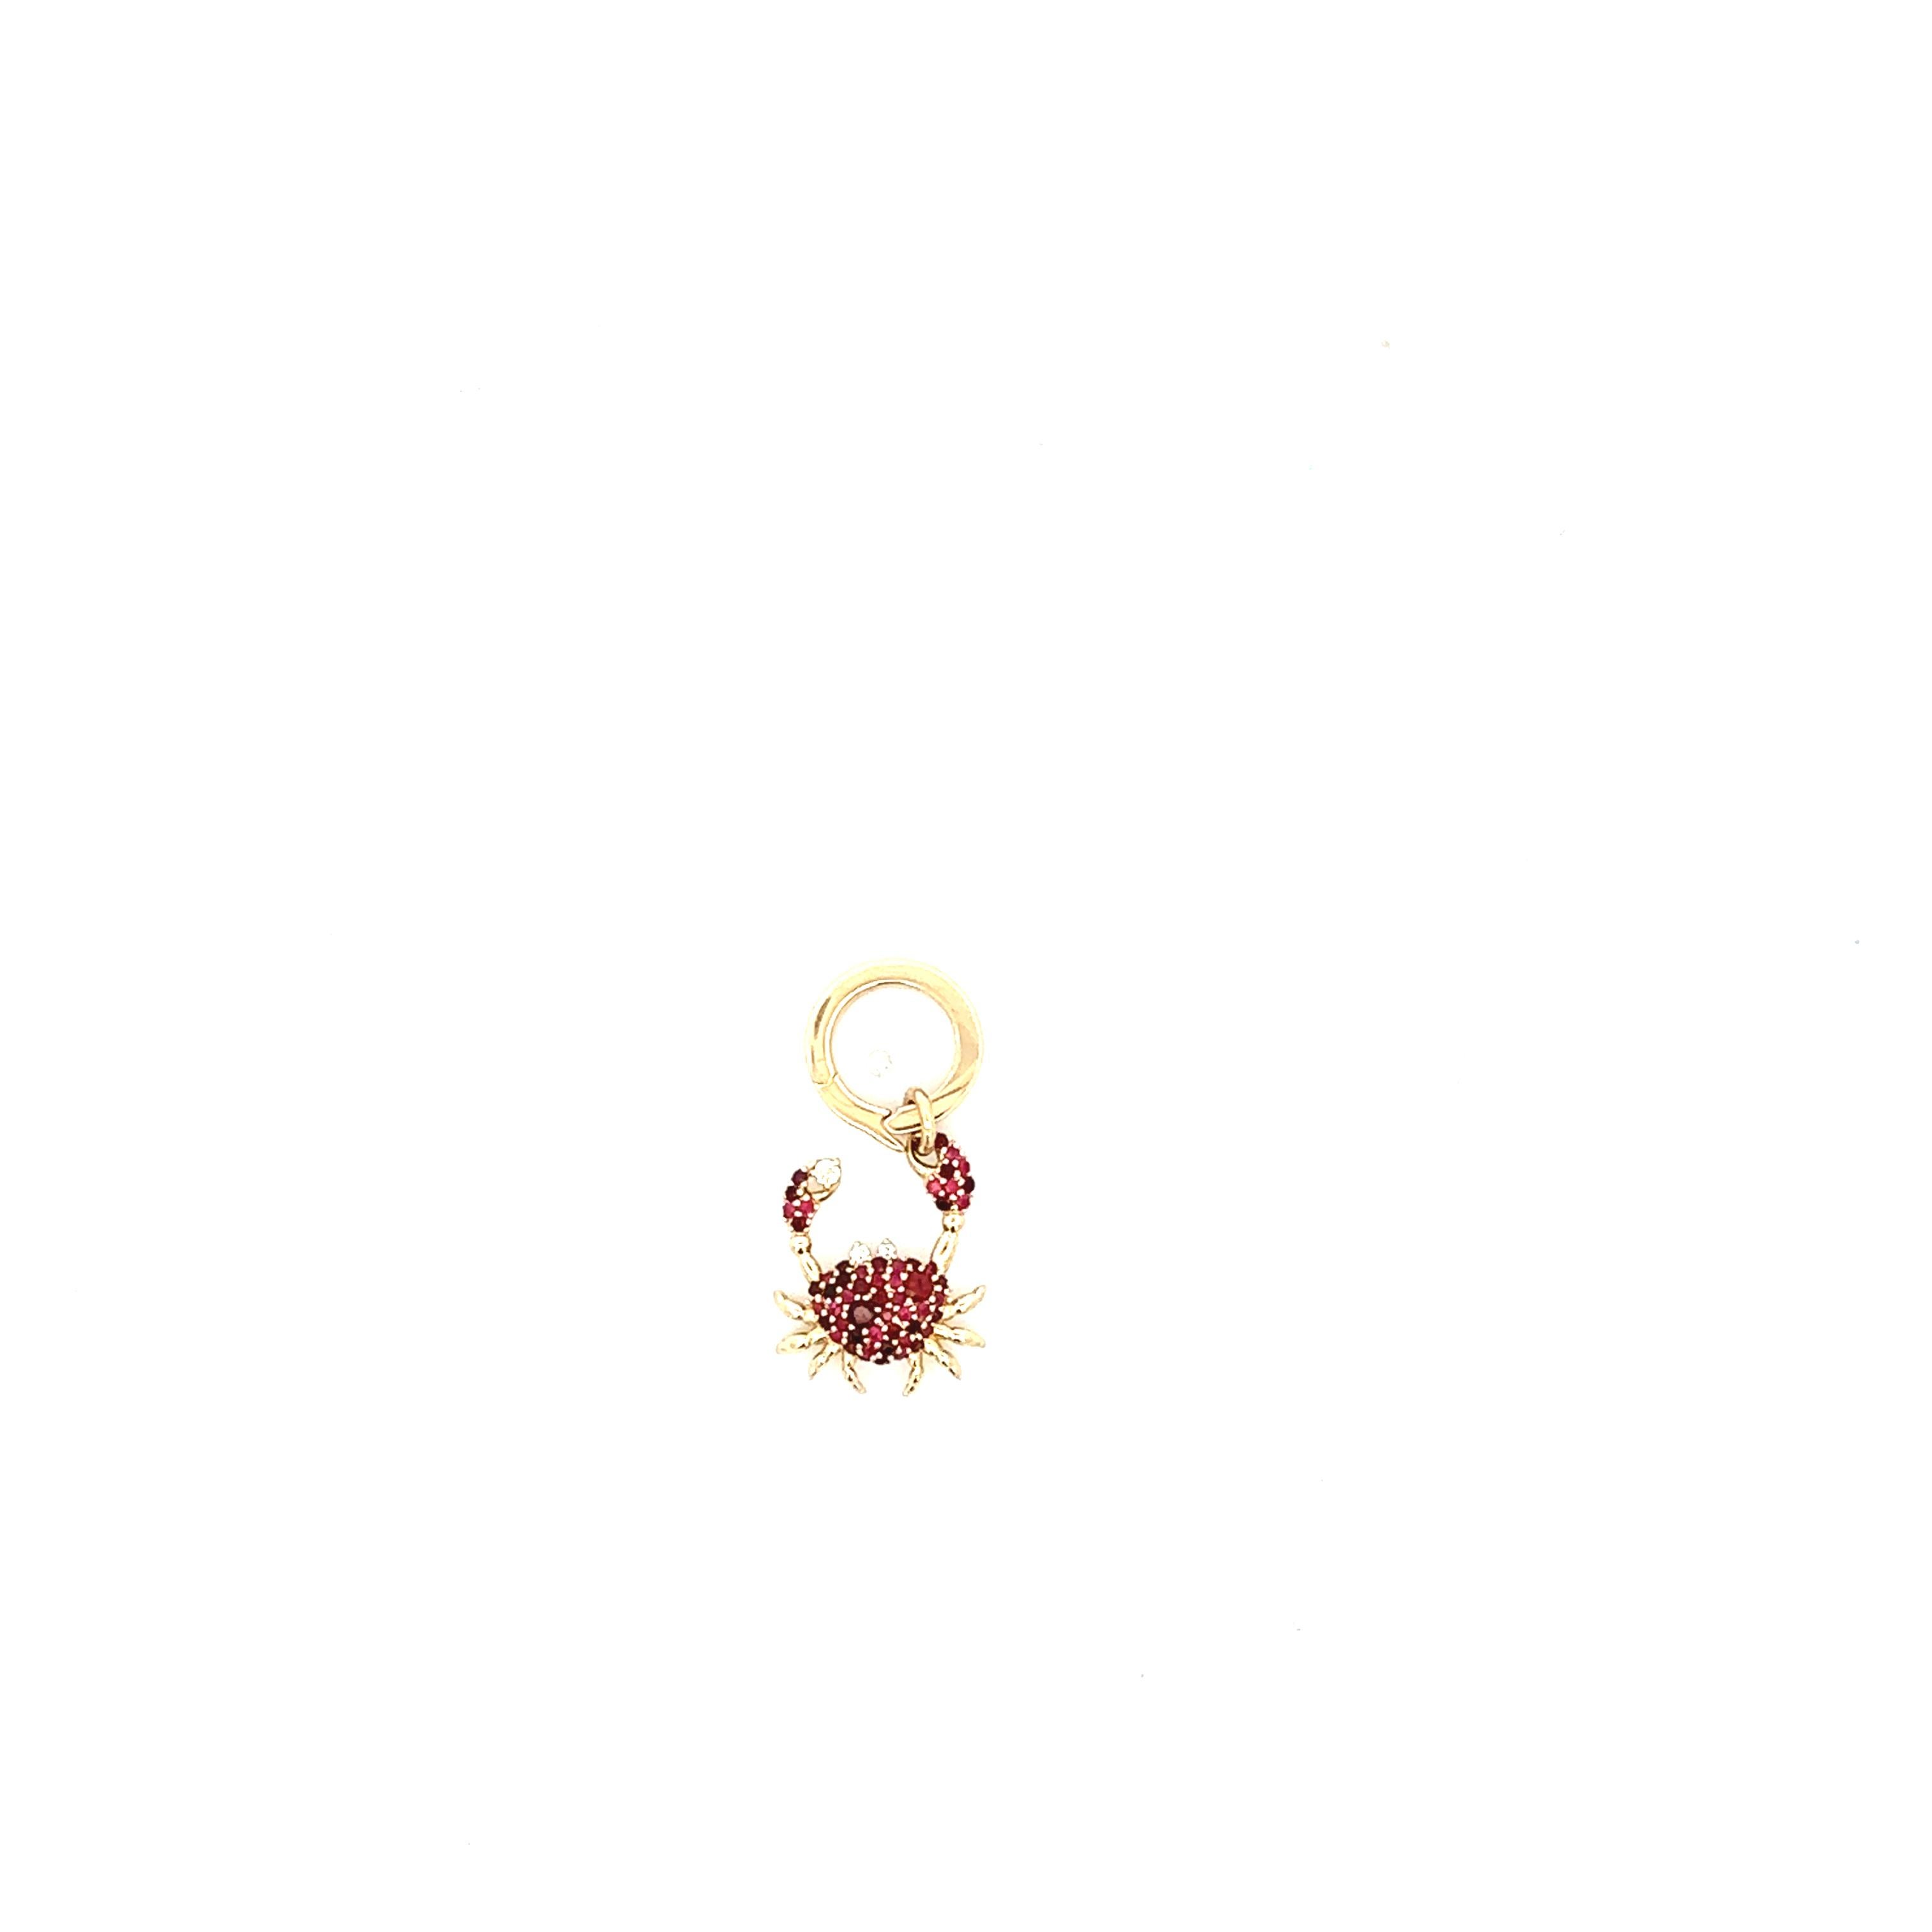 Adina Reyter One of a Kind Ruby + Garnet + Diamond Crab Charm-Y14

14k yellow gold hinged crab charm with hand-set pavé diamonds, garnets and rubies. Charm measures approximately 14 mm x 12 mm. Wear it with your favorite necklace and add more